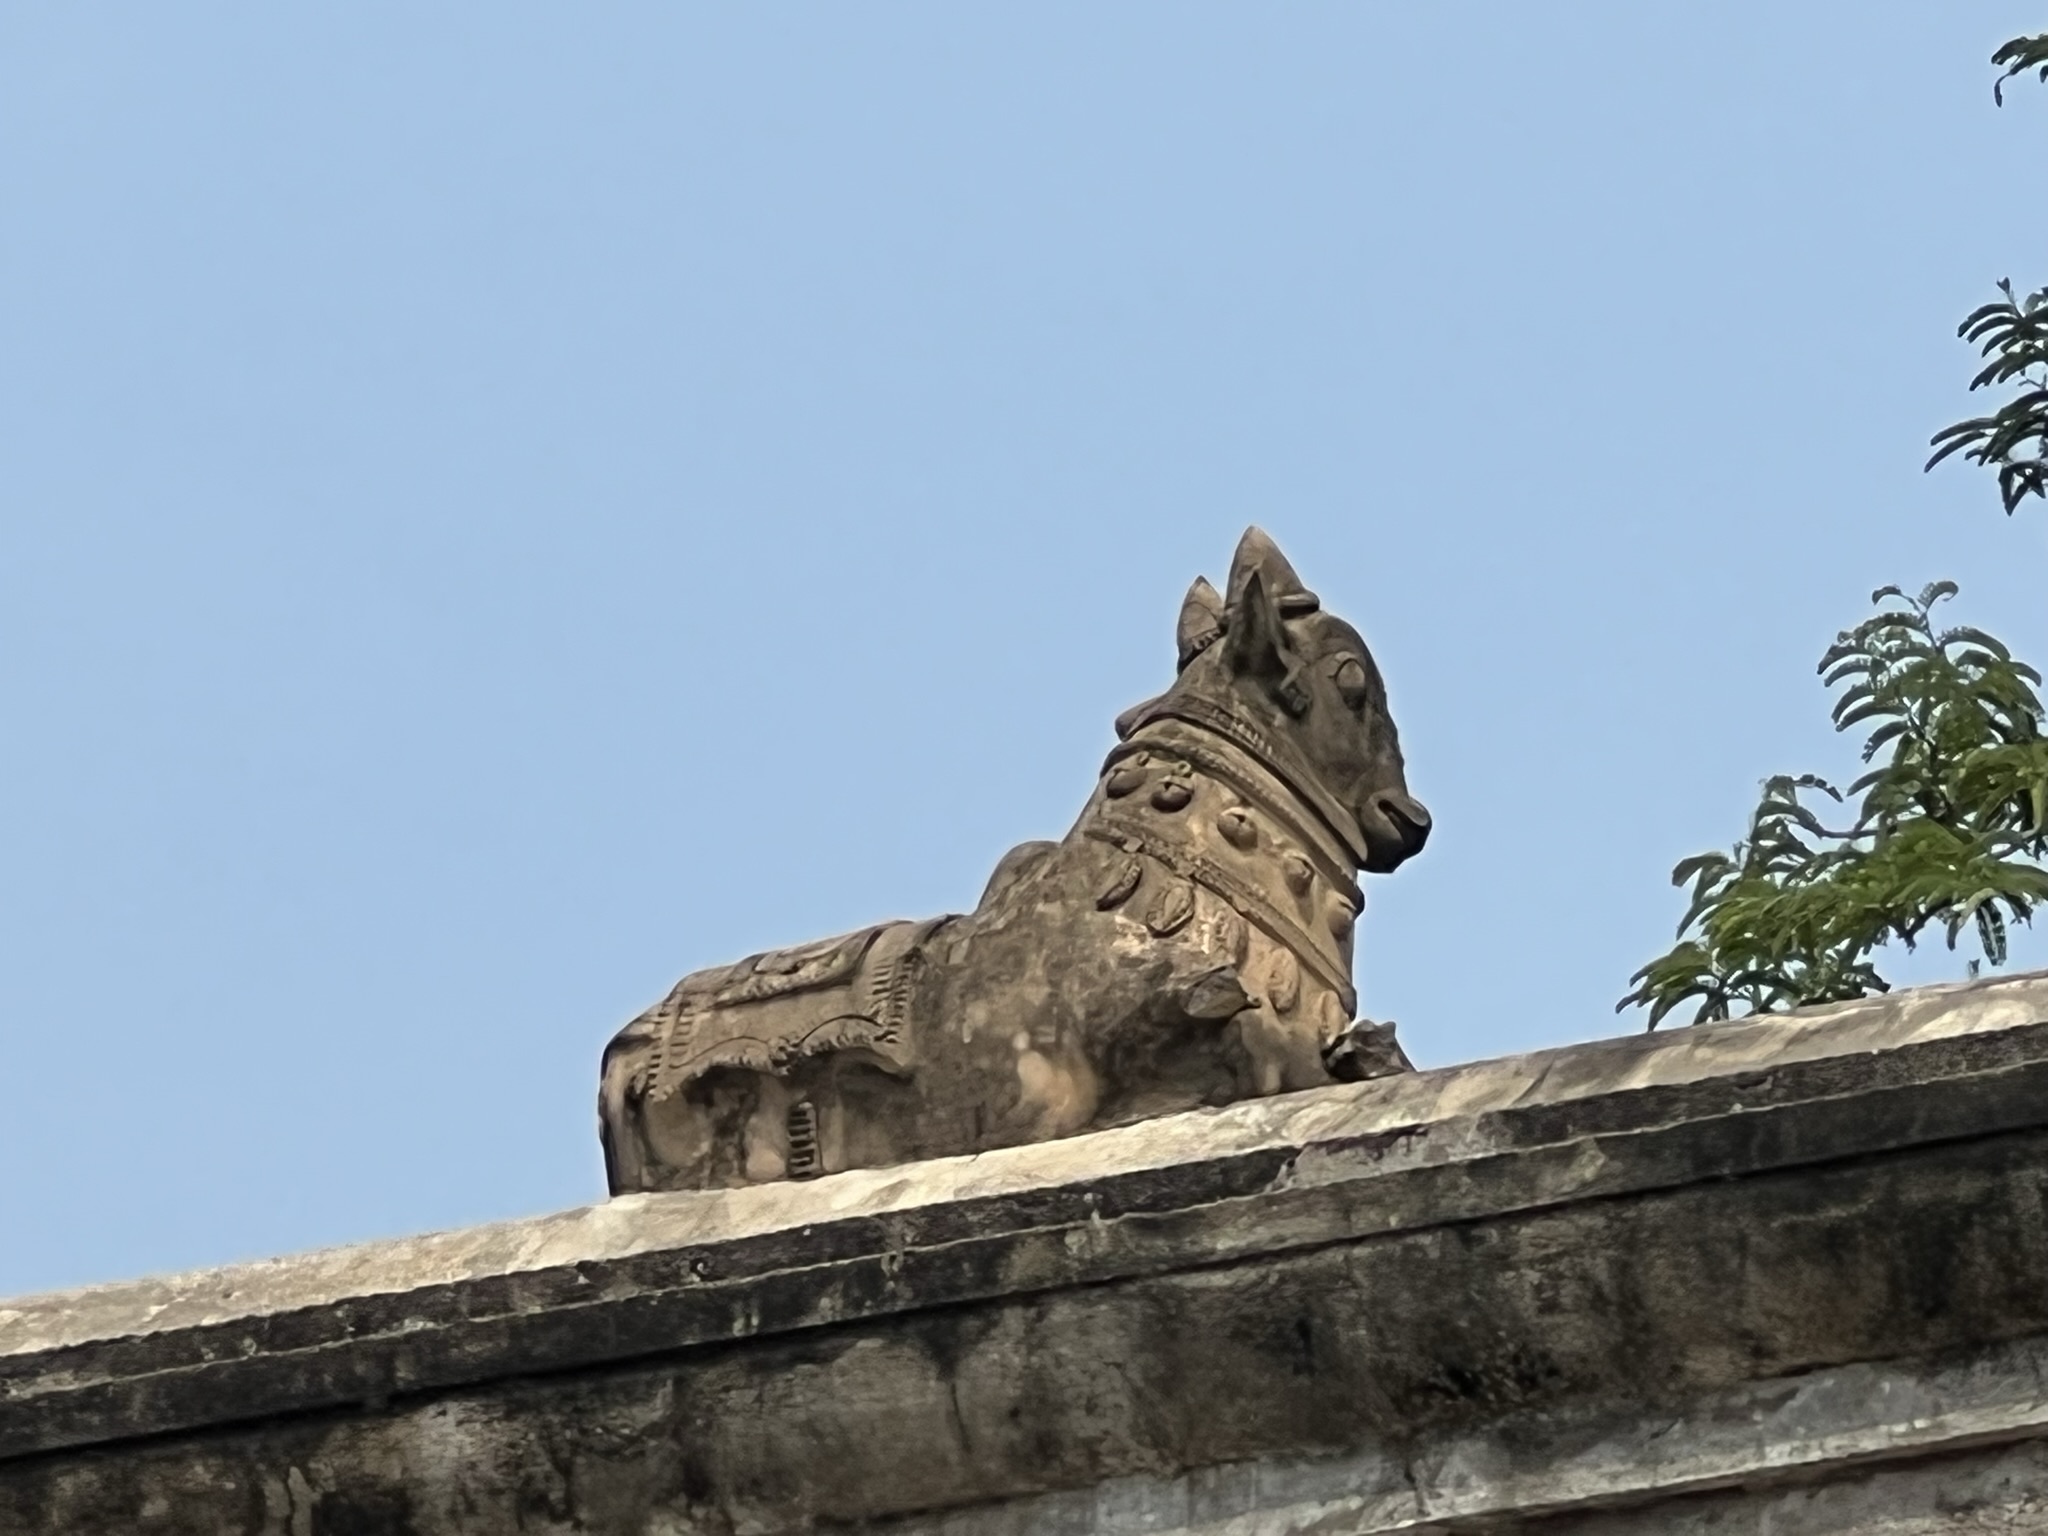 Shiva's mount, a bull named Nandi atop the walls of the temple